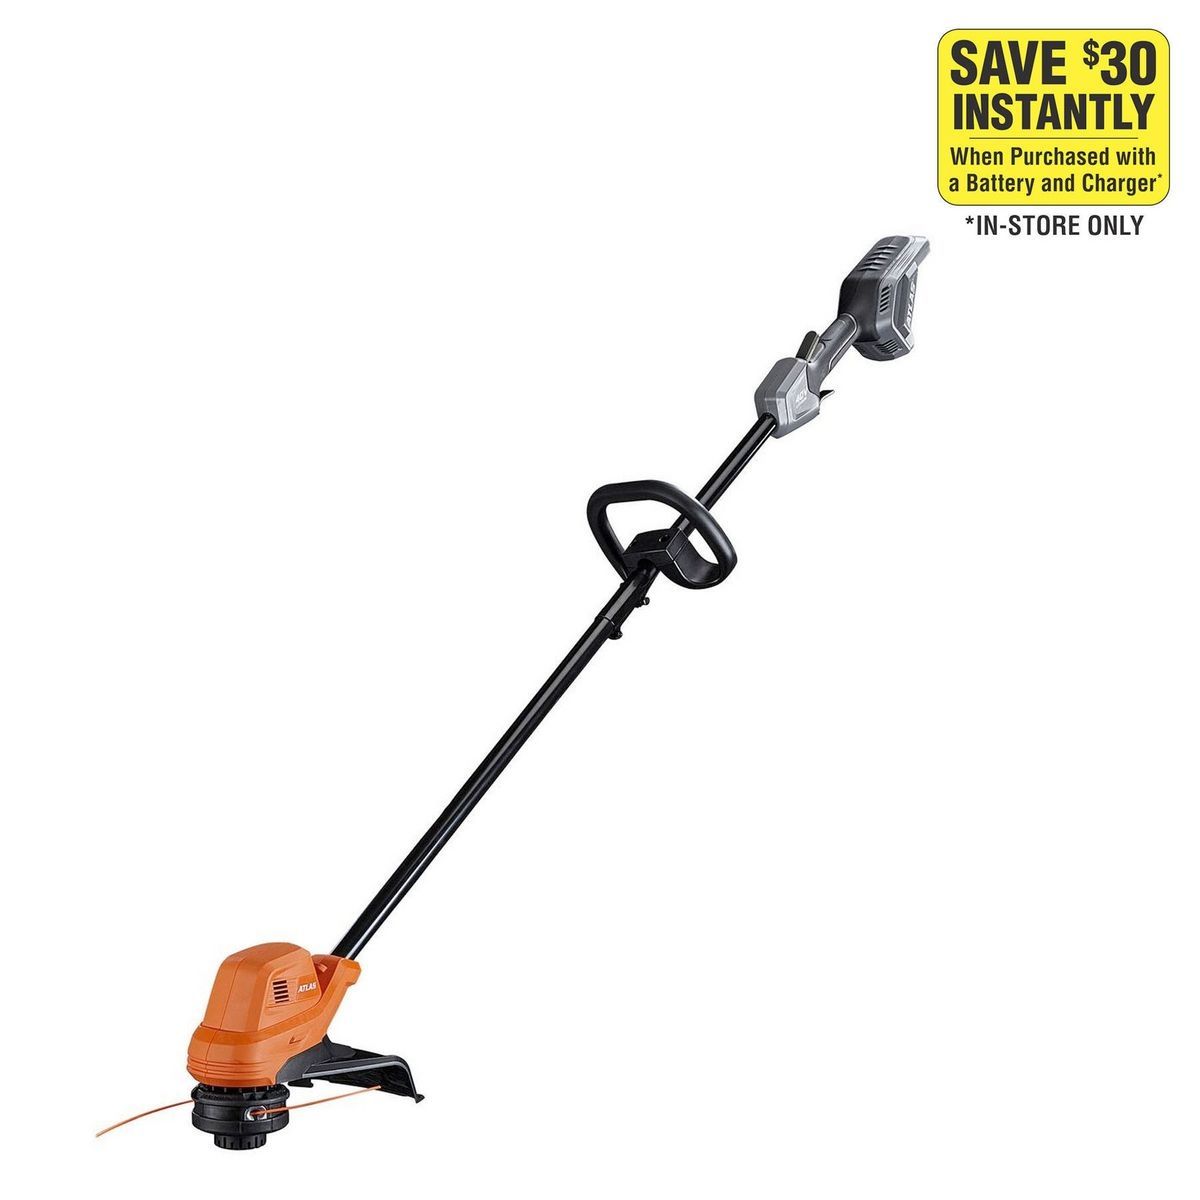 40V Cordless 15 In. String Trimmer - Tool Only on Sale At Harbor Freight Tools